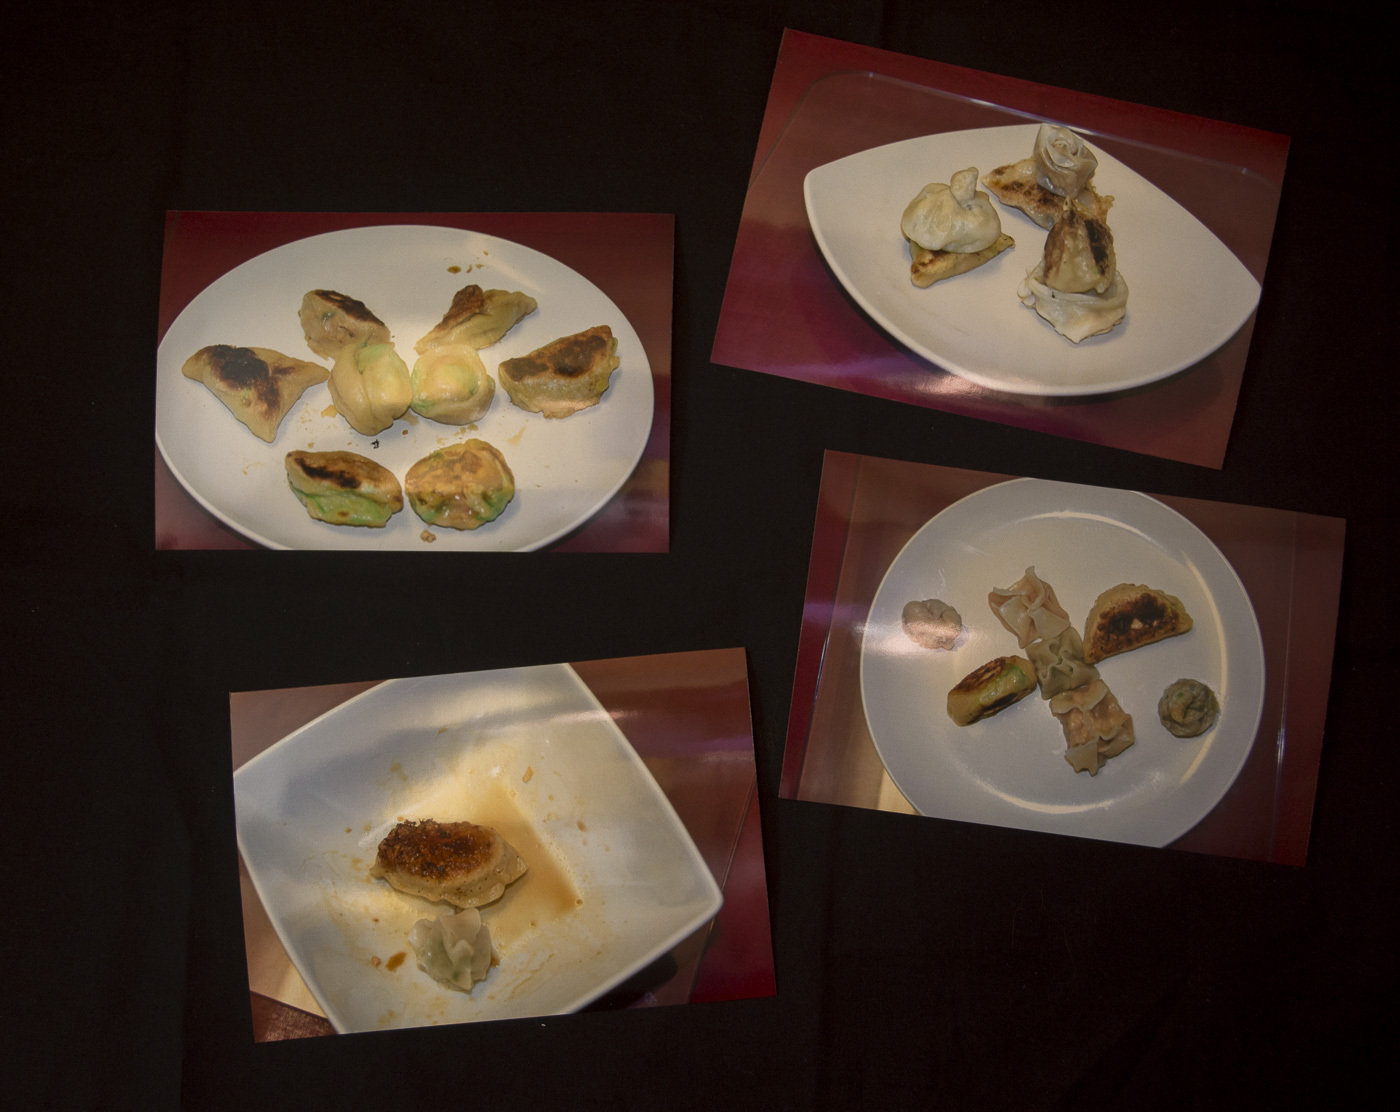 4 photographs of different dumpling dishes plated by attendees of the 19 Pigs event